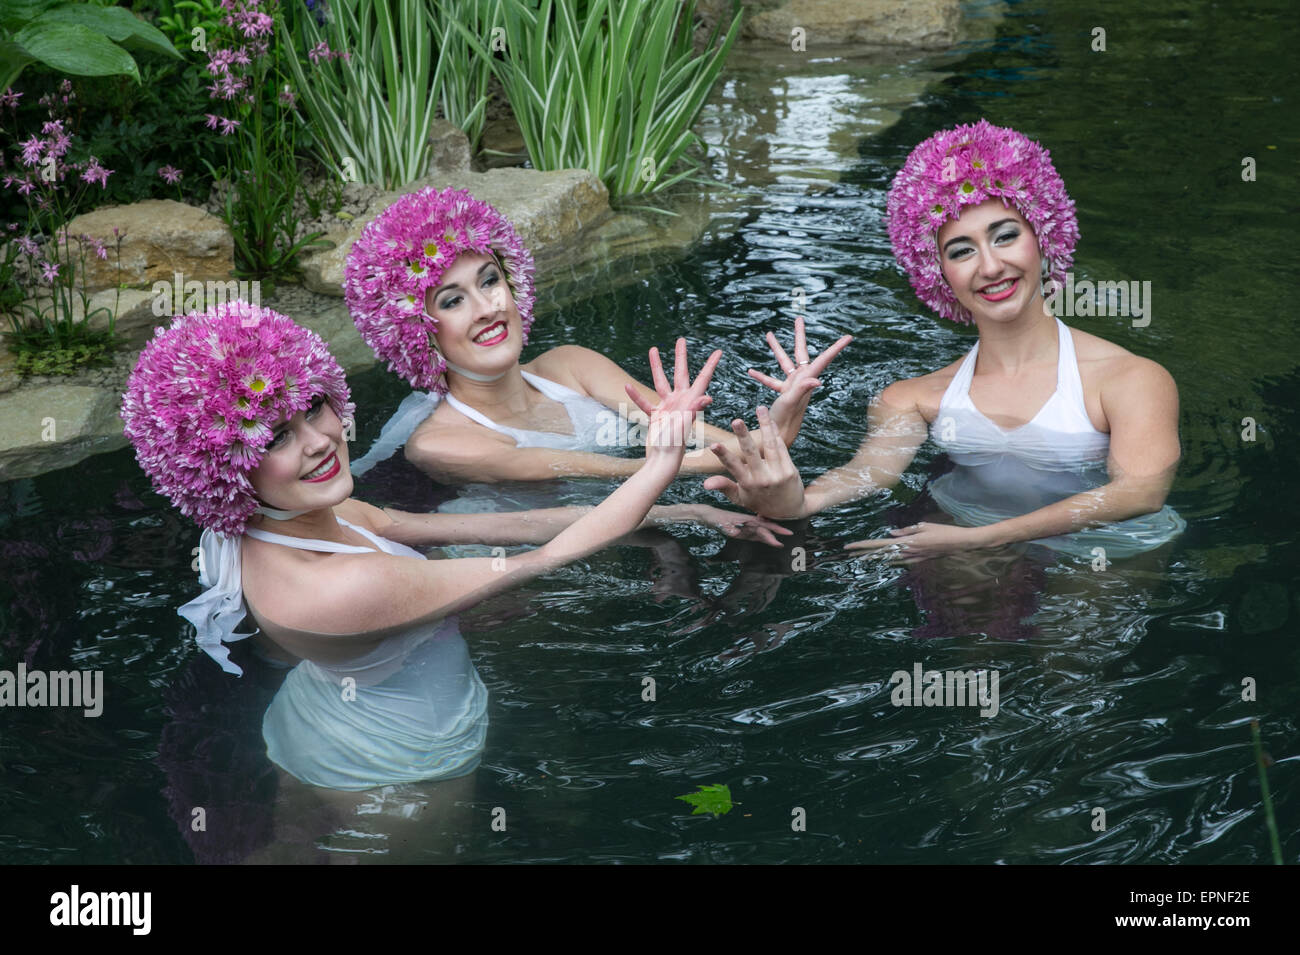 British Olympian Katie Clark, braved the rain at this year's Chelsea Flower Show to take a dip in a show-garden pond. Stock Photo